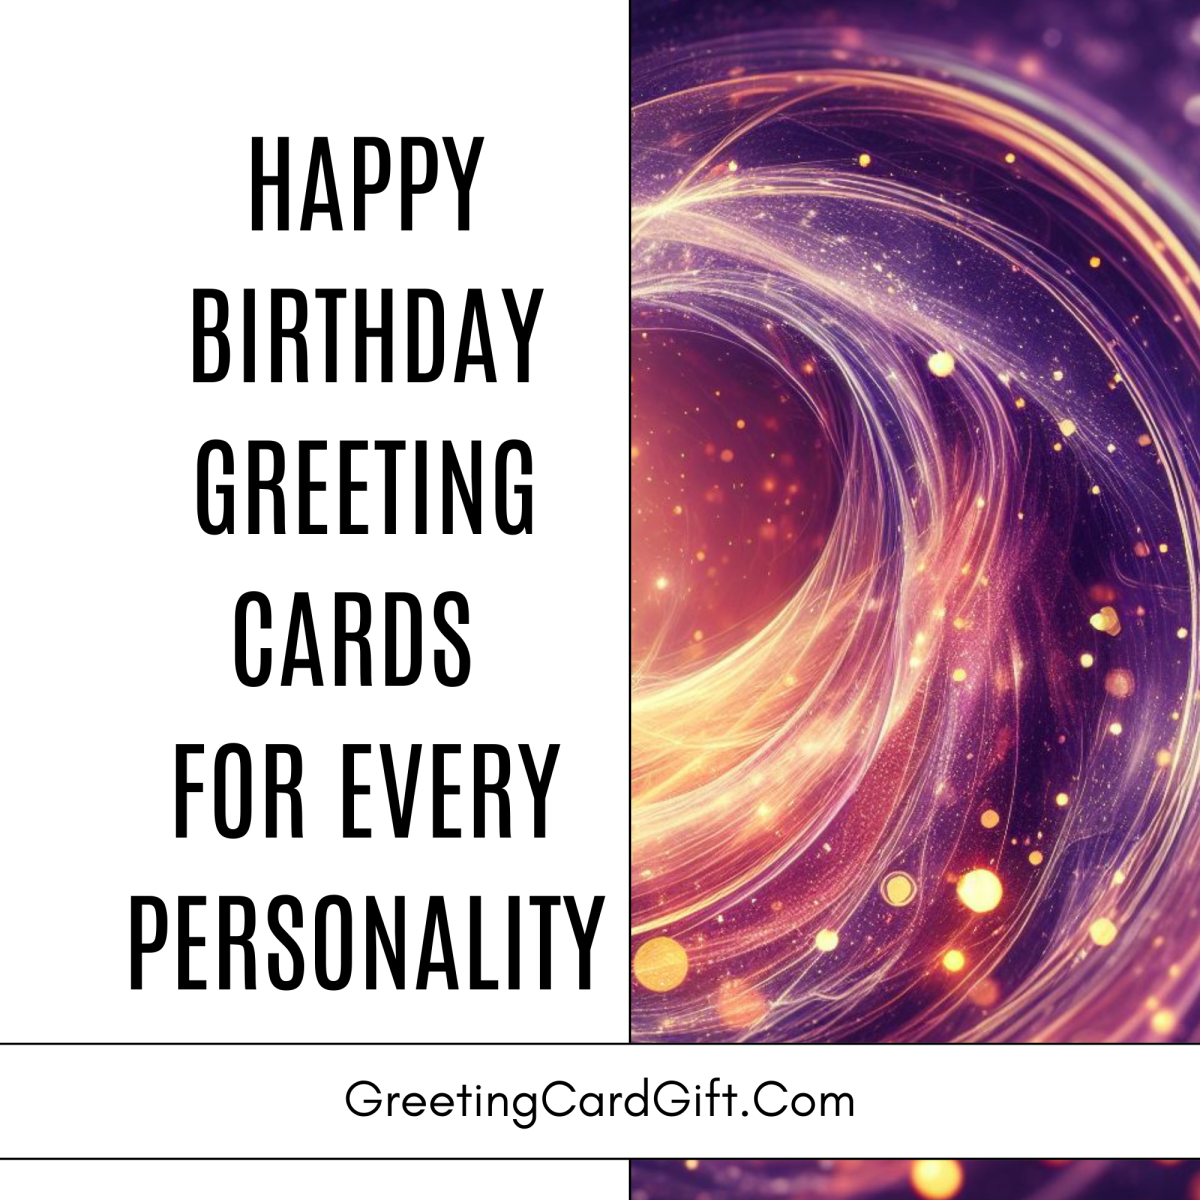 Happy Birthday Greeting Cards For Every Personality